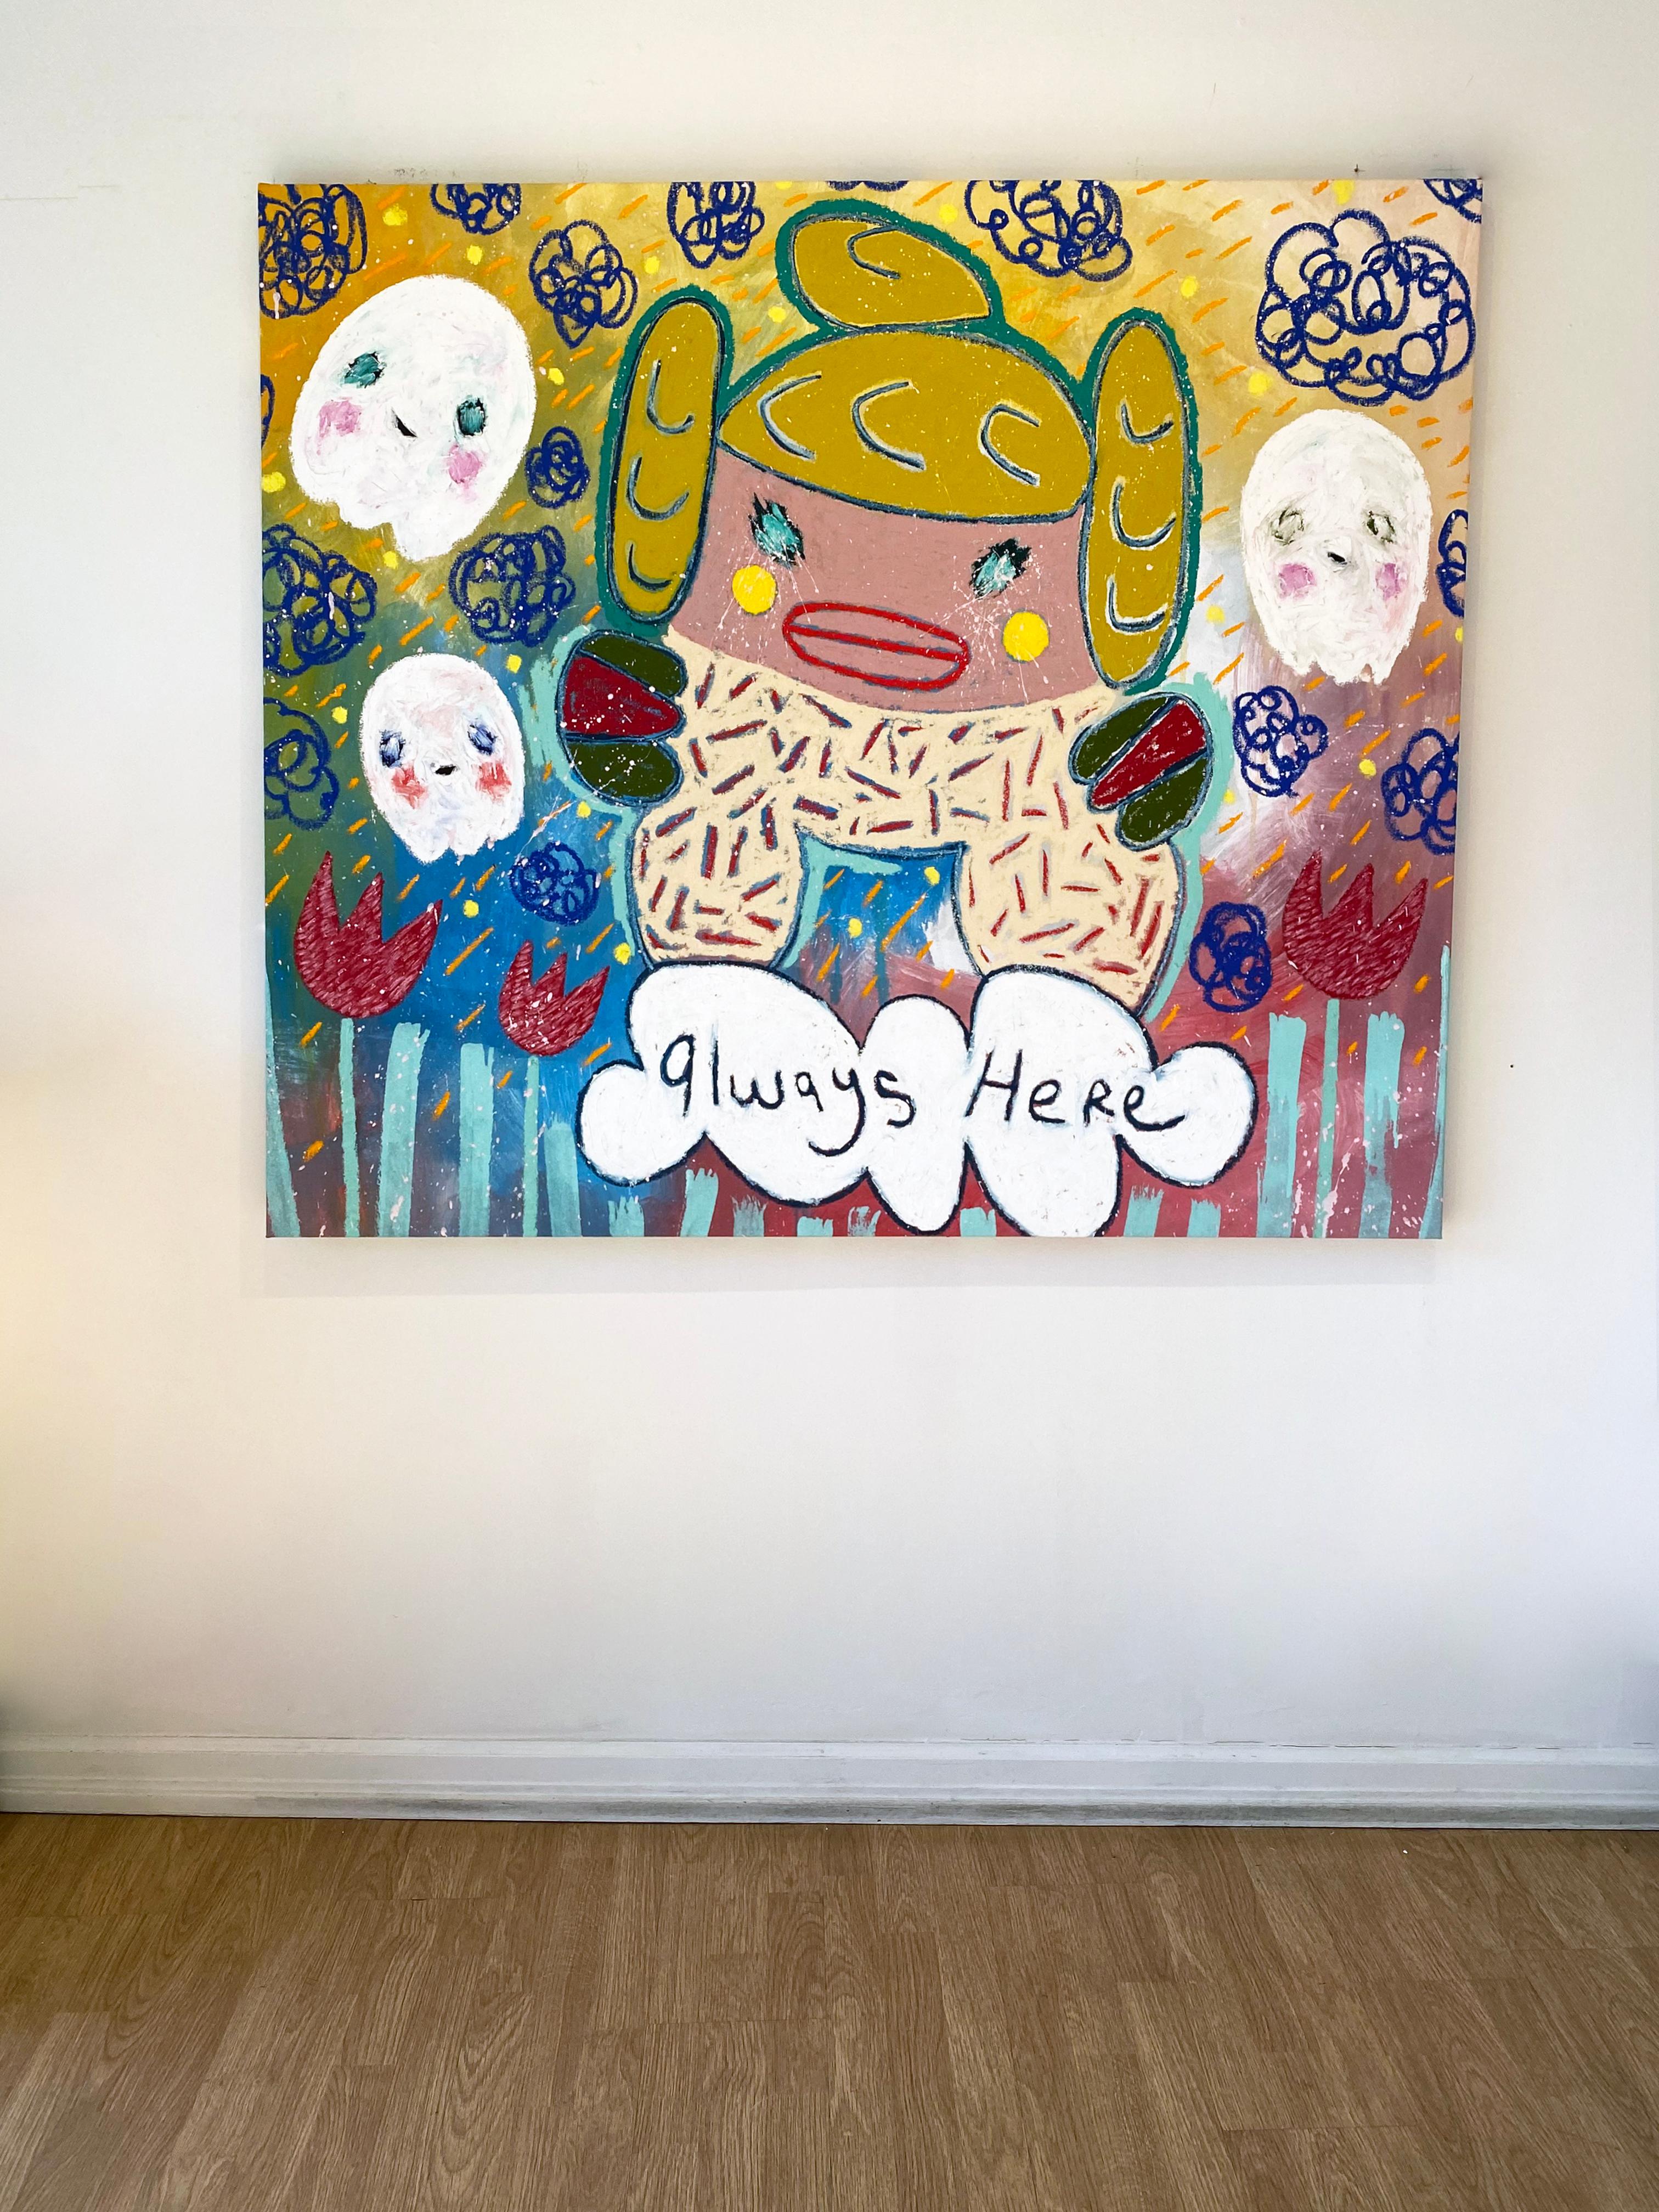 'Little Fighter Girl Is Always Here With You' by Adam Handler, 2020. Oil stick and acrylic on canvas, 44 x 52 in. This painting by contemporary artist Adam Handler features a girl and three ghosts together in his signature faux-naif, child-like